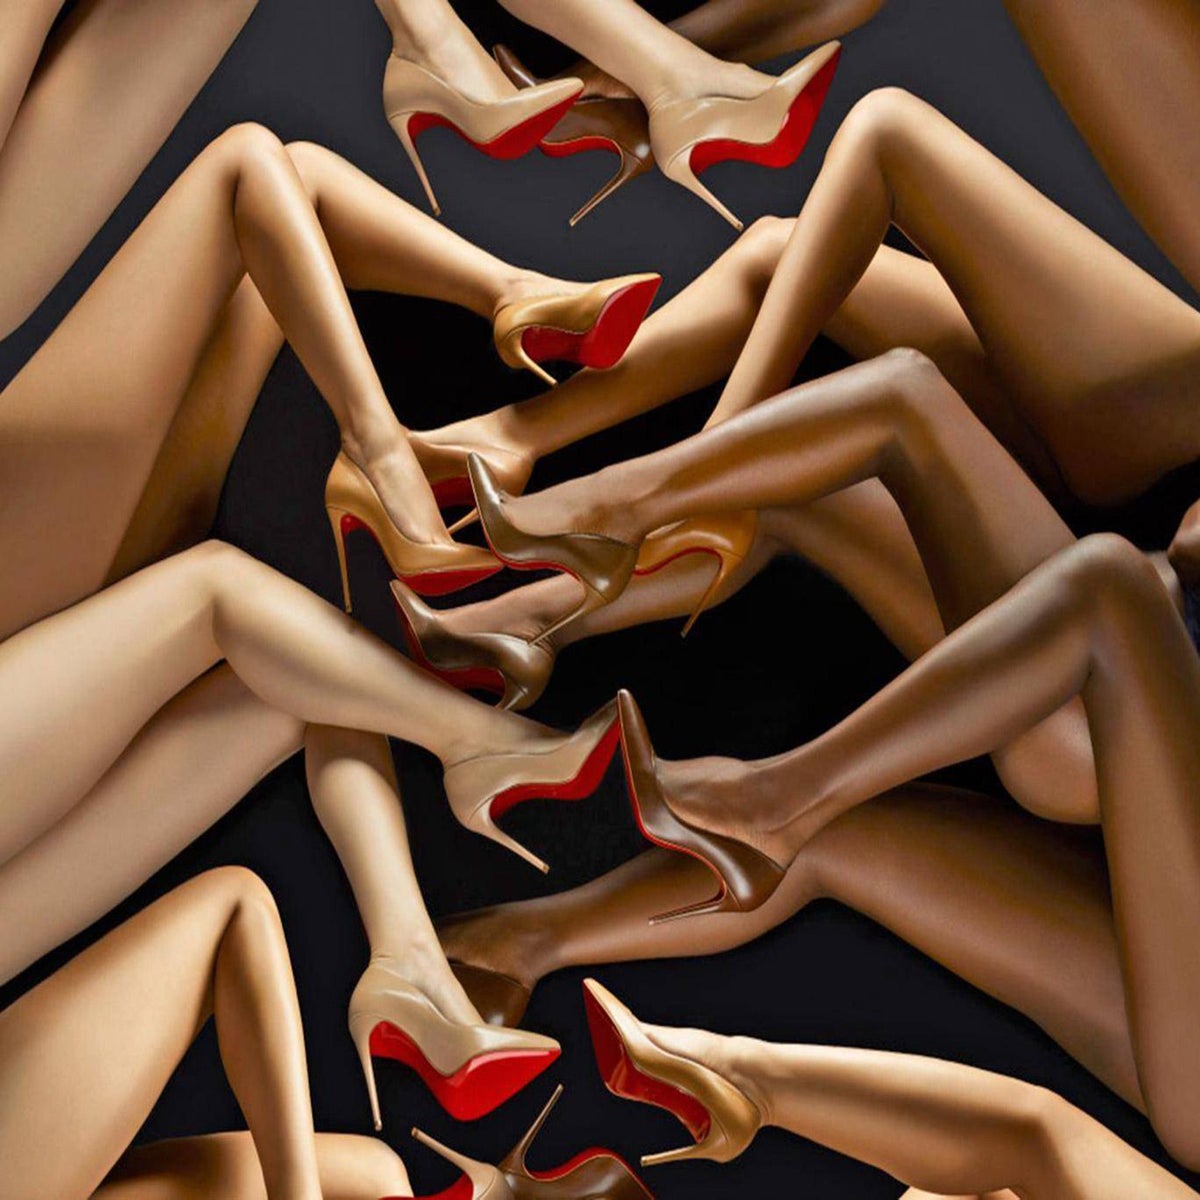 Louboutin wins EU court battle over red-soled shoes